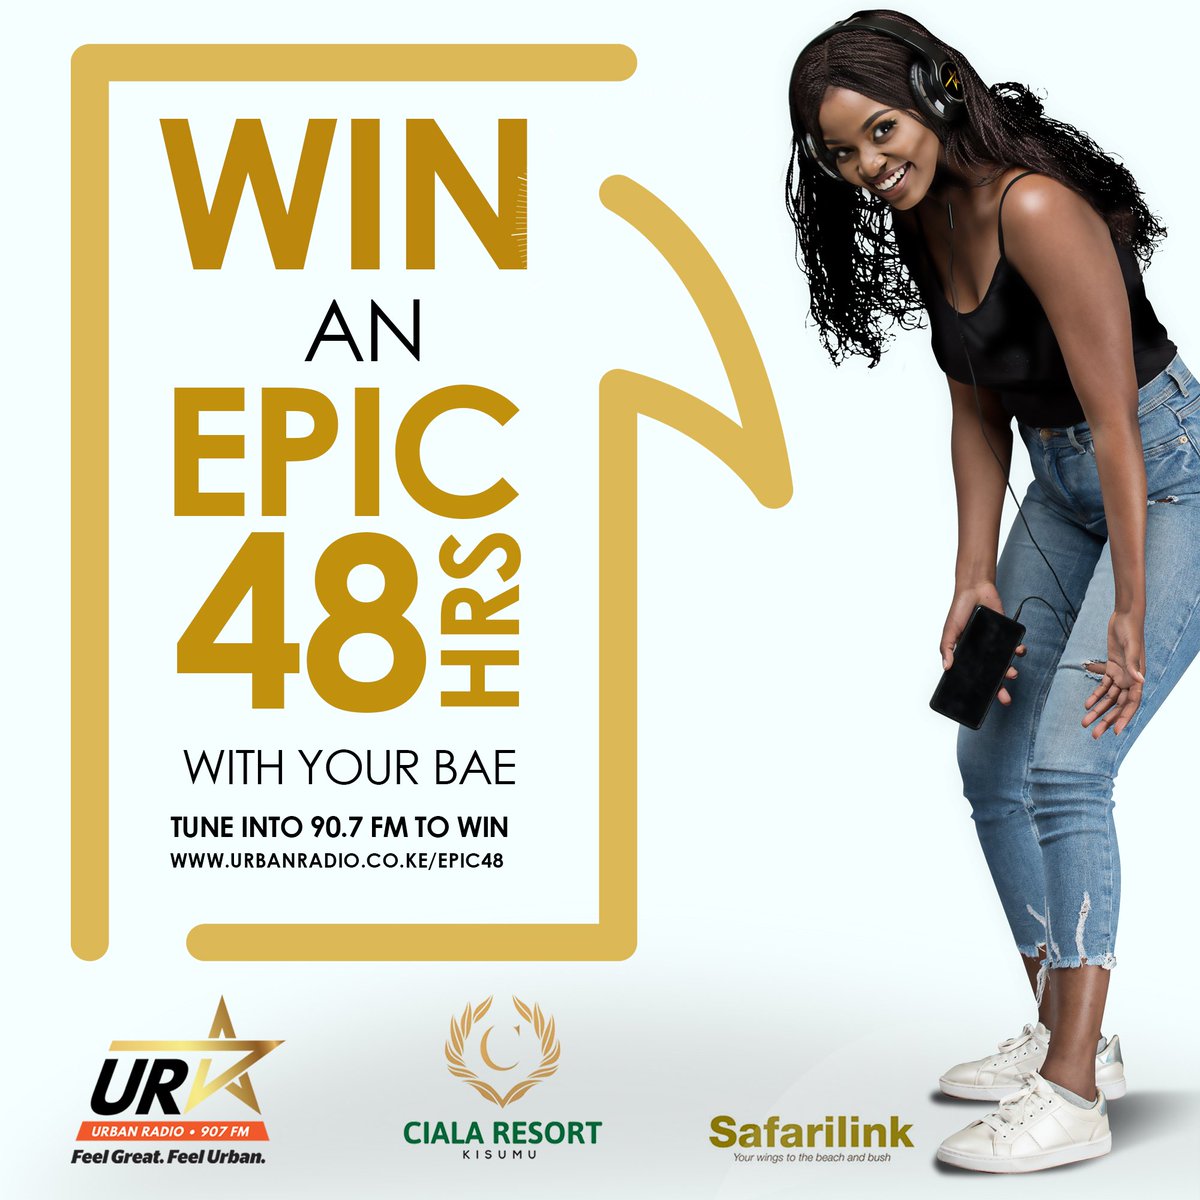 Registrations for EPIC48 close at midnight on Sunday 16 May. Don't miss out on this chance to win the best 48hours money cannot buy courtesy of us. Head over to urbanradio.co.ke/epic48 now. It's about to be EPIC! @Flysafarilink @KisumuCiala